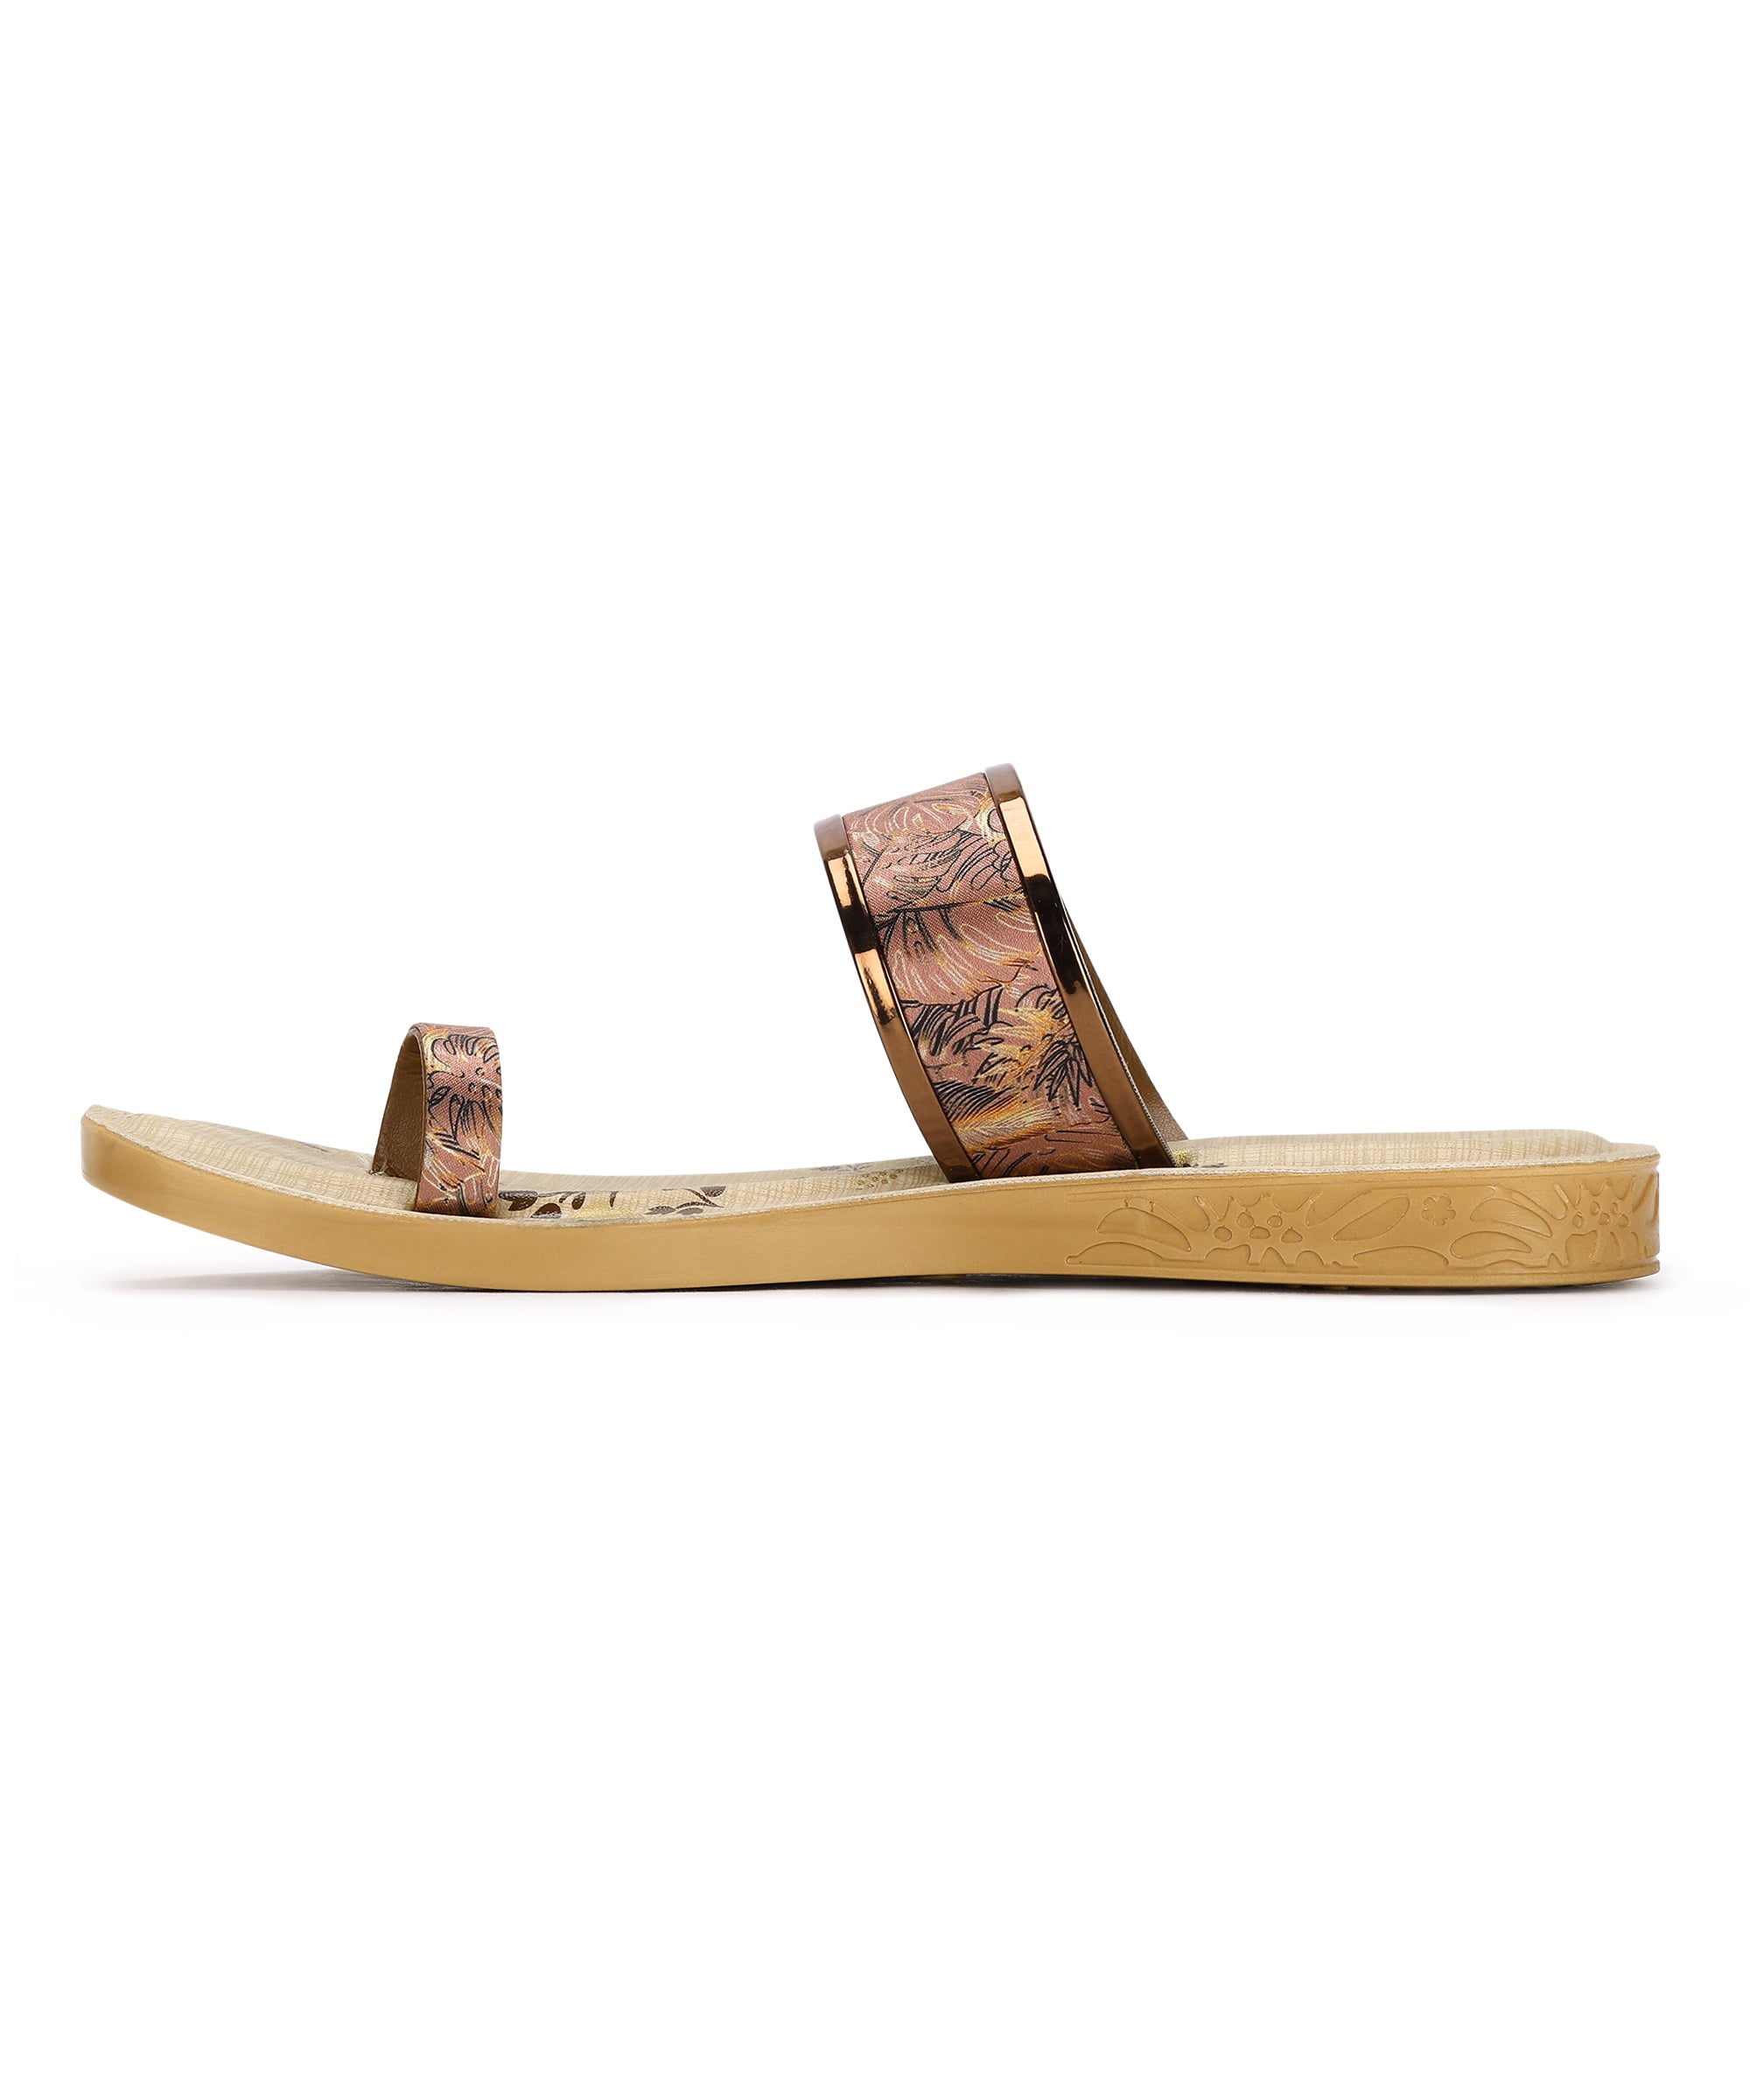 Paragon PUK7019L Women Sandals | Casual &amp; Formal Sandals | Stylish, Comfortable &amp; Durable | For Daily &amp; Occasion Wear